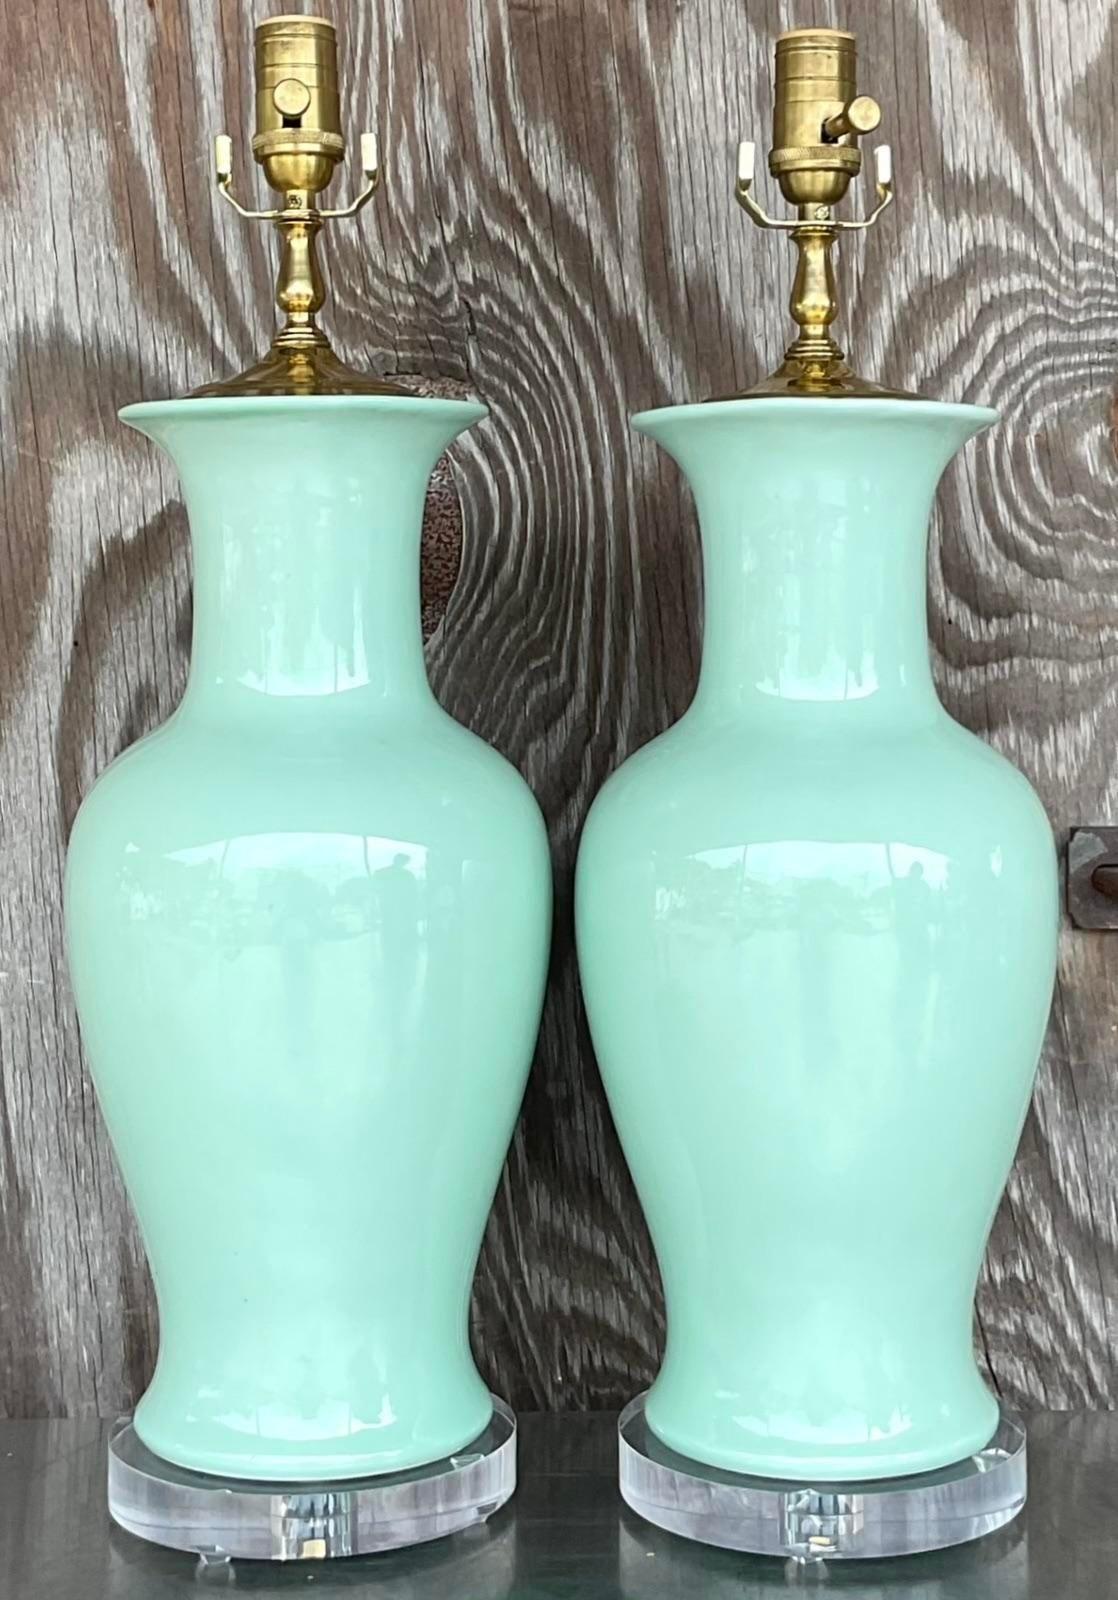 A fabulous pair of vintage Regency table lamps. A chic glazed ceramic in a fresh minty green. Fully restored with all new hardware, wiring and lucite plinths. Acquired from a Palm Beach estate.